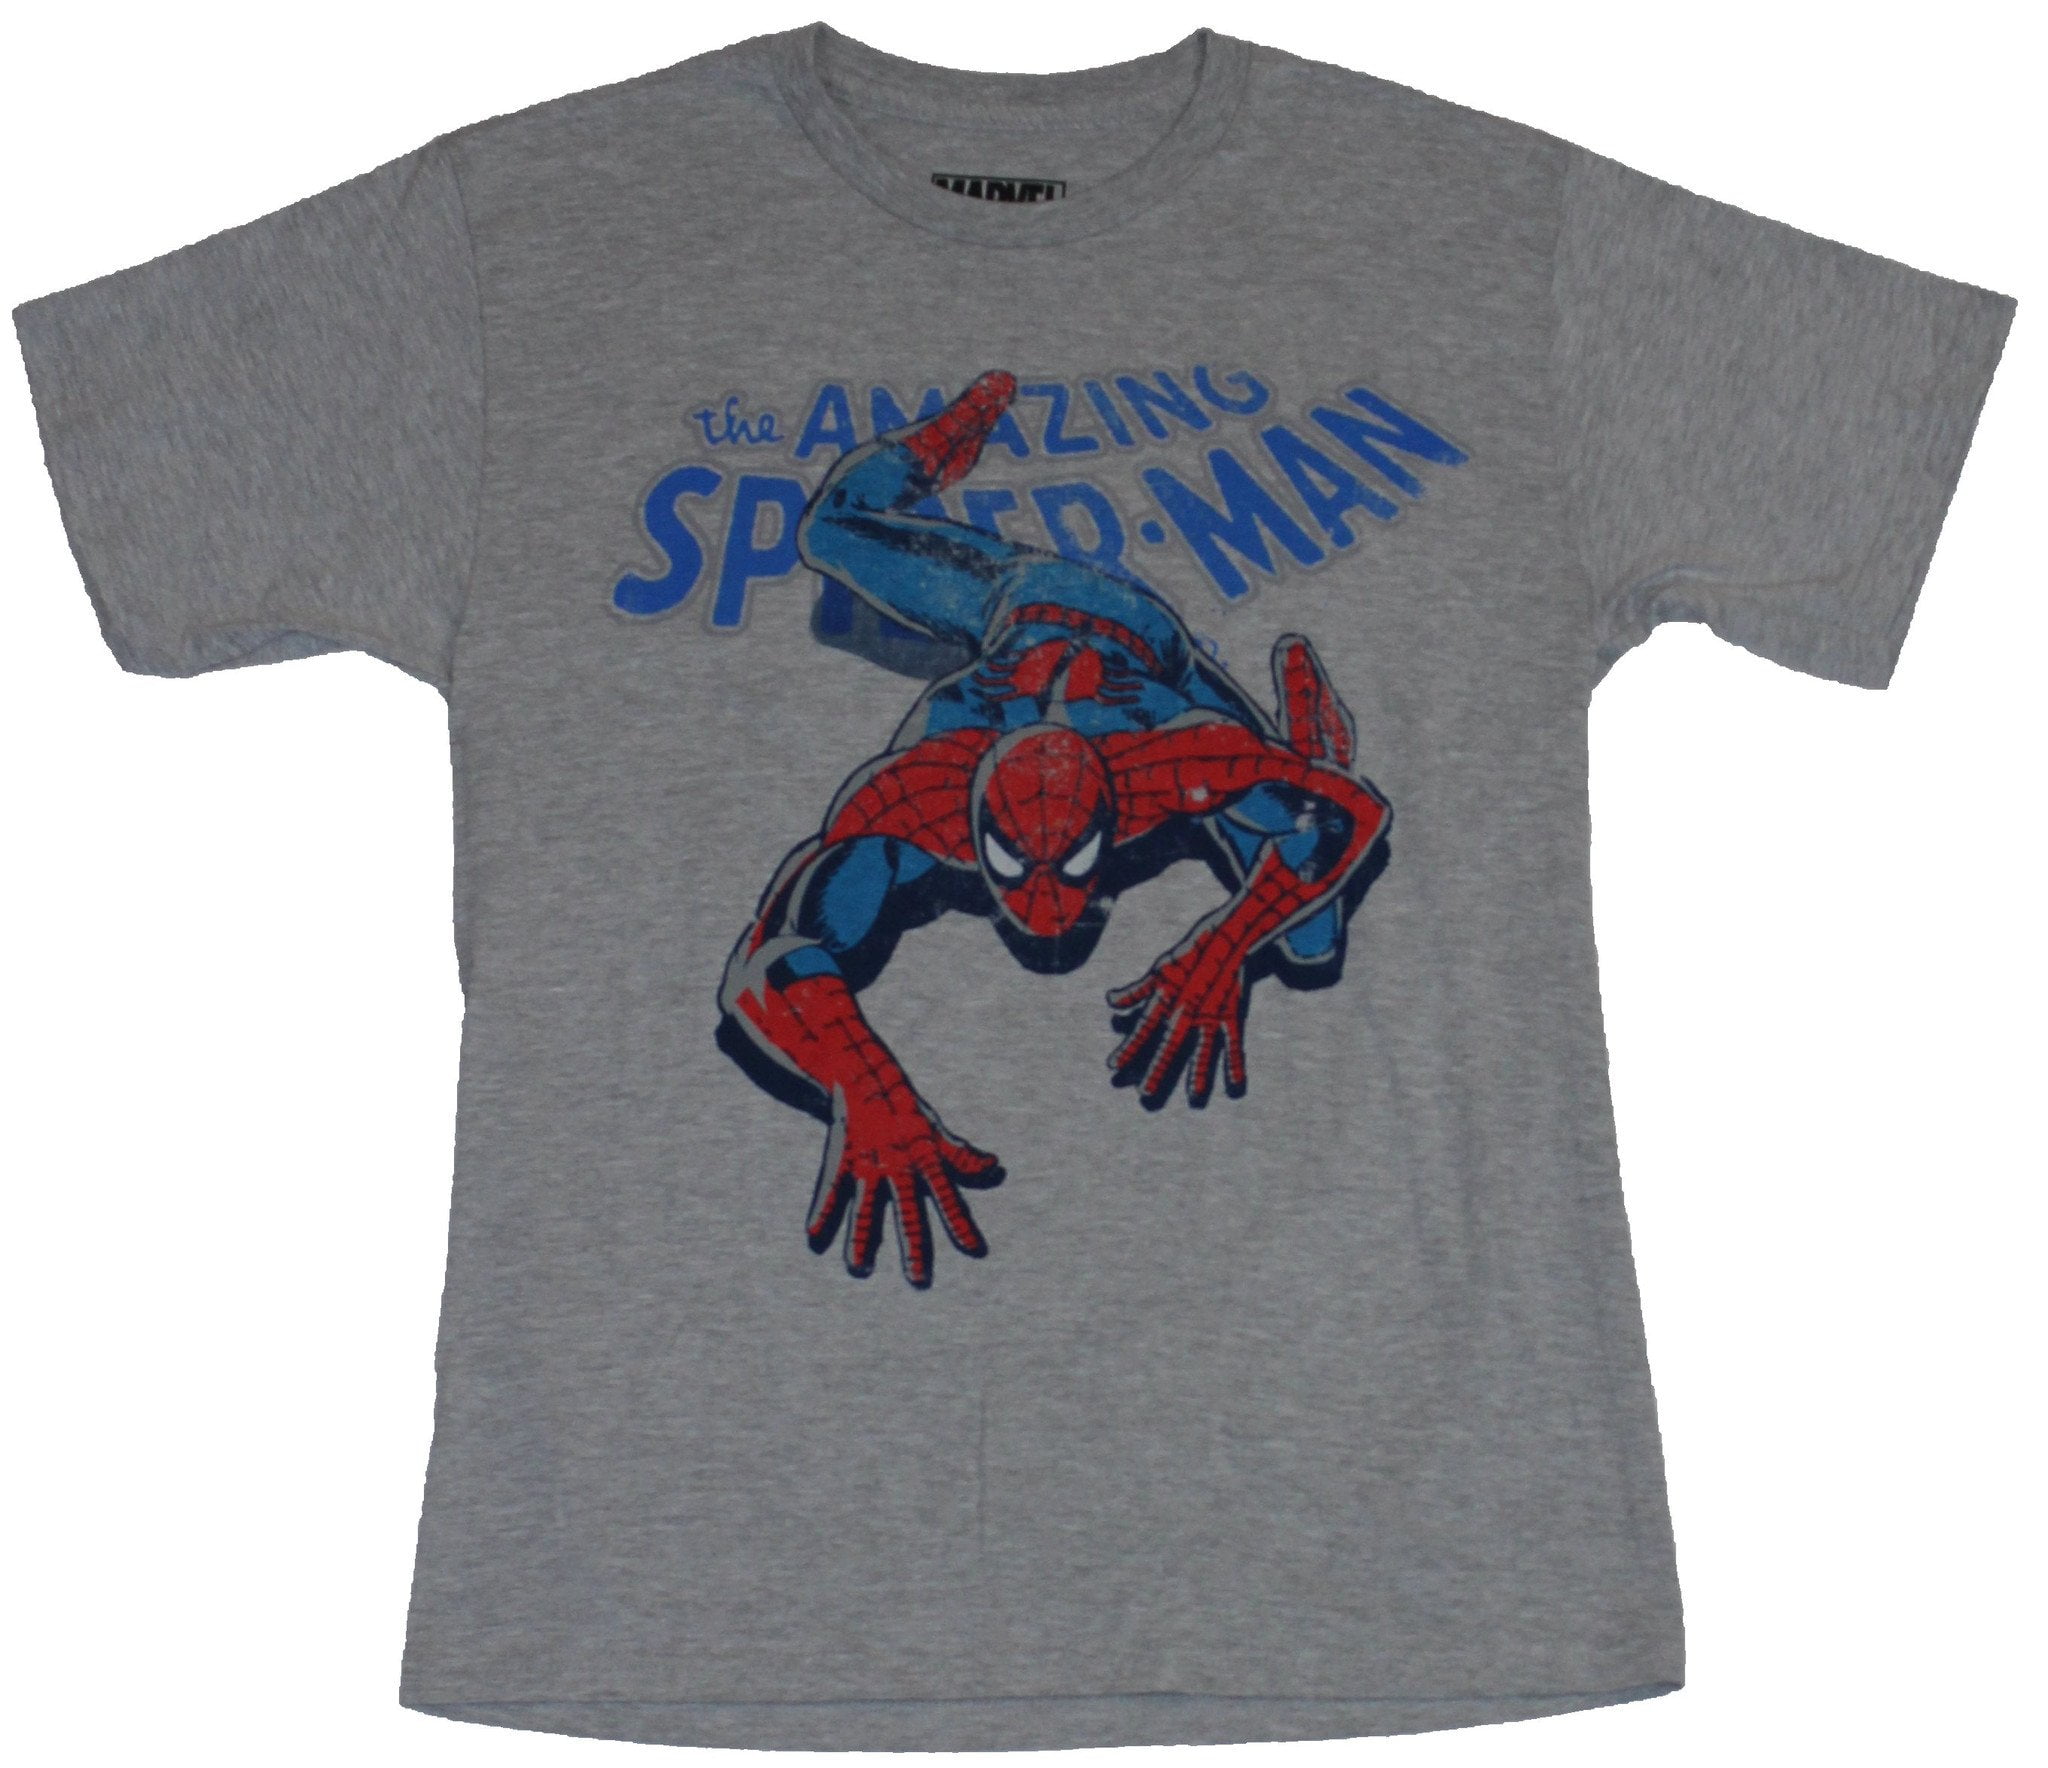 Marvel Officially Licensed Merchandise Distressed Spider-Man Girly T-Shirt